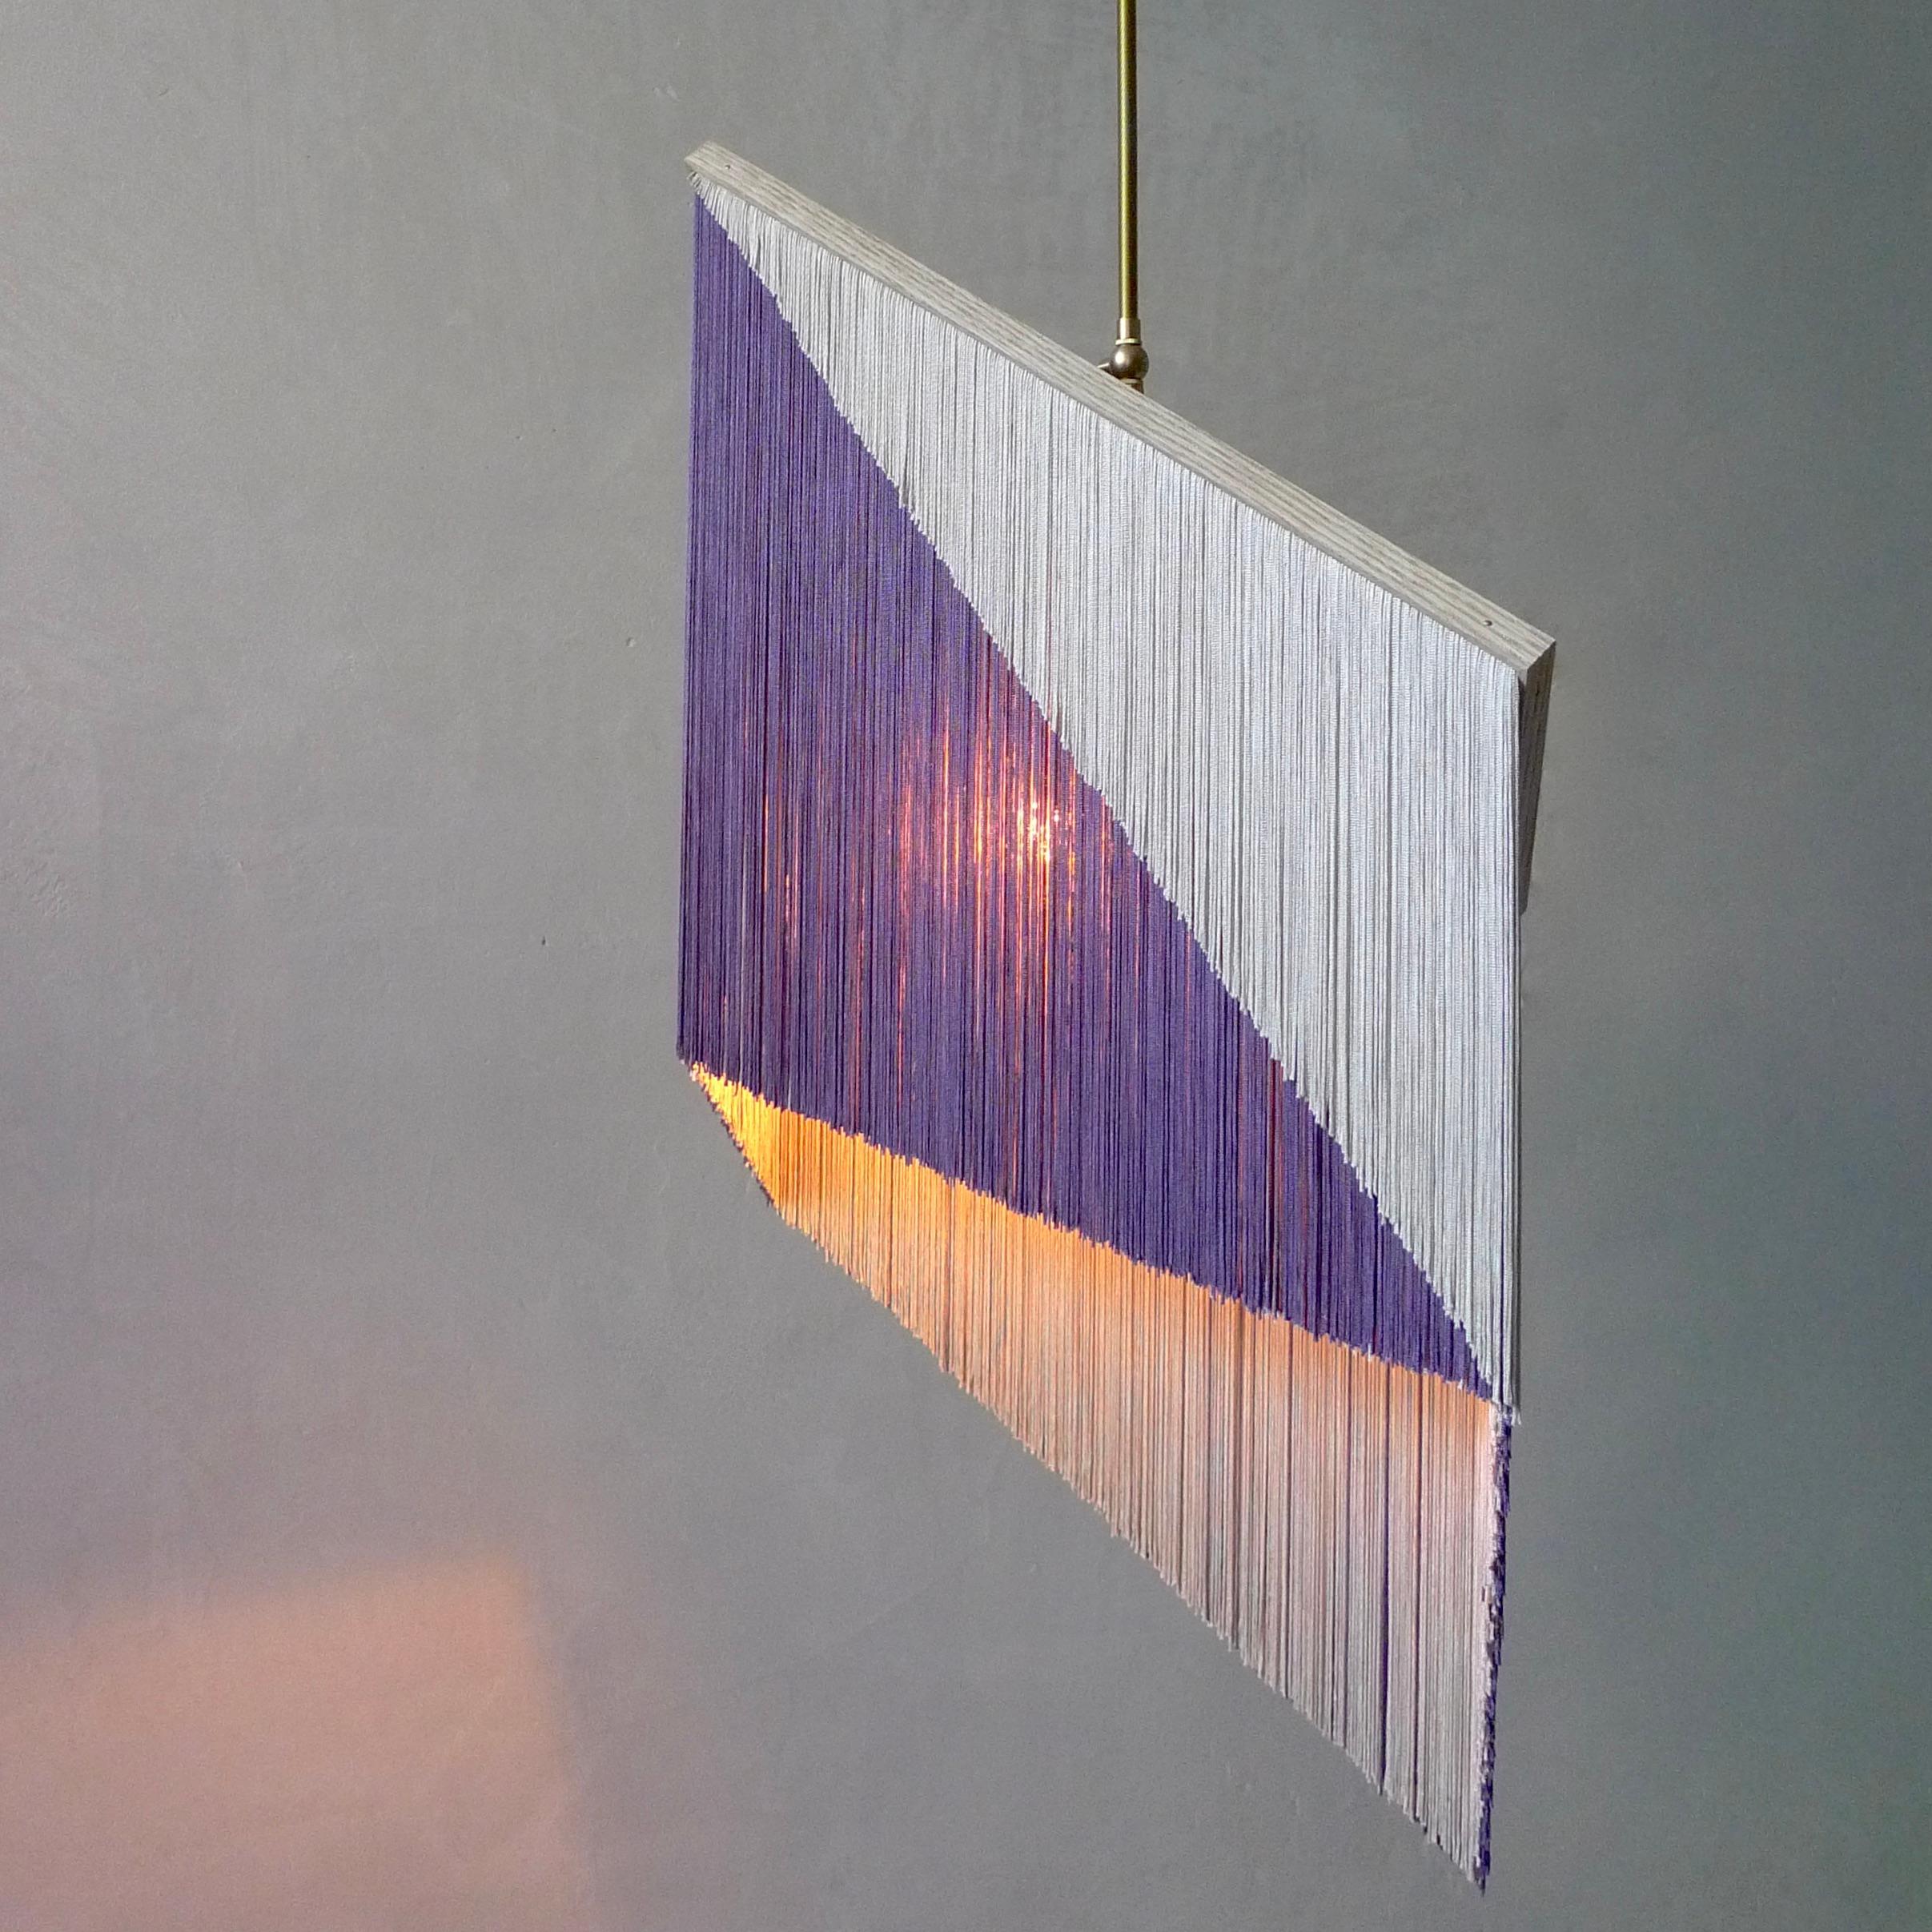 No. 26 Pendant Lamp by Sander Bottinga
Objet size 4
Dimensions: H 46 - 90 x W 51 x D 20 cm
Materials: Brass, Wood, Leather, Viscose Fringes
Variations available.

Handmade in brass, wood, leather and 3 double layered viscose fringes